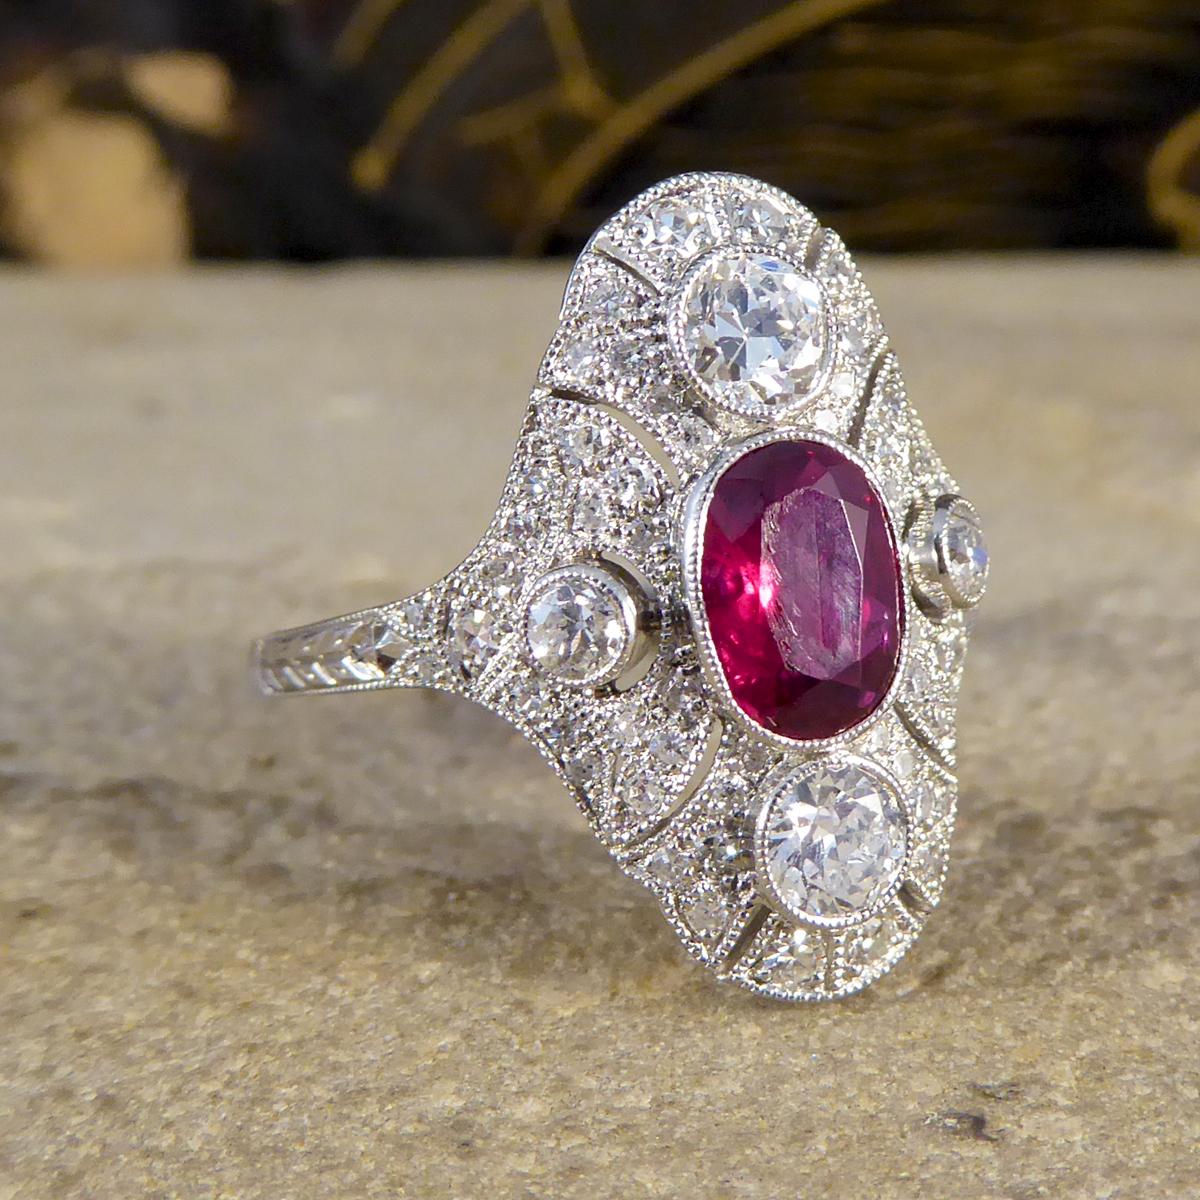 The design of this ring has been inspired from the classic Art Deco period, however has been crafted recently. Modelled in Platinum, the design features an oval cut 0.80ct Ruby in the centre with a surround of Diamonds. This navette-shaped plaque